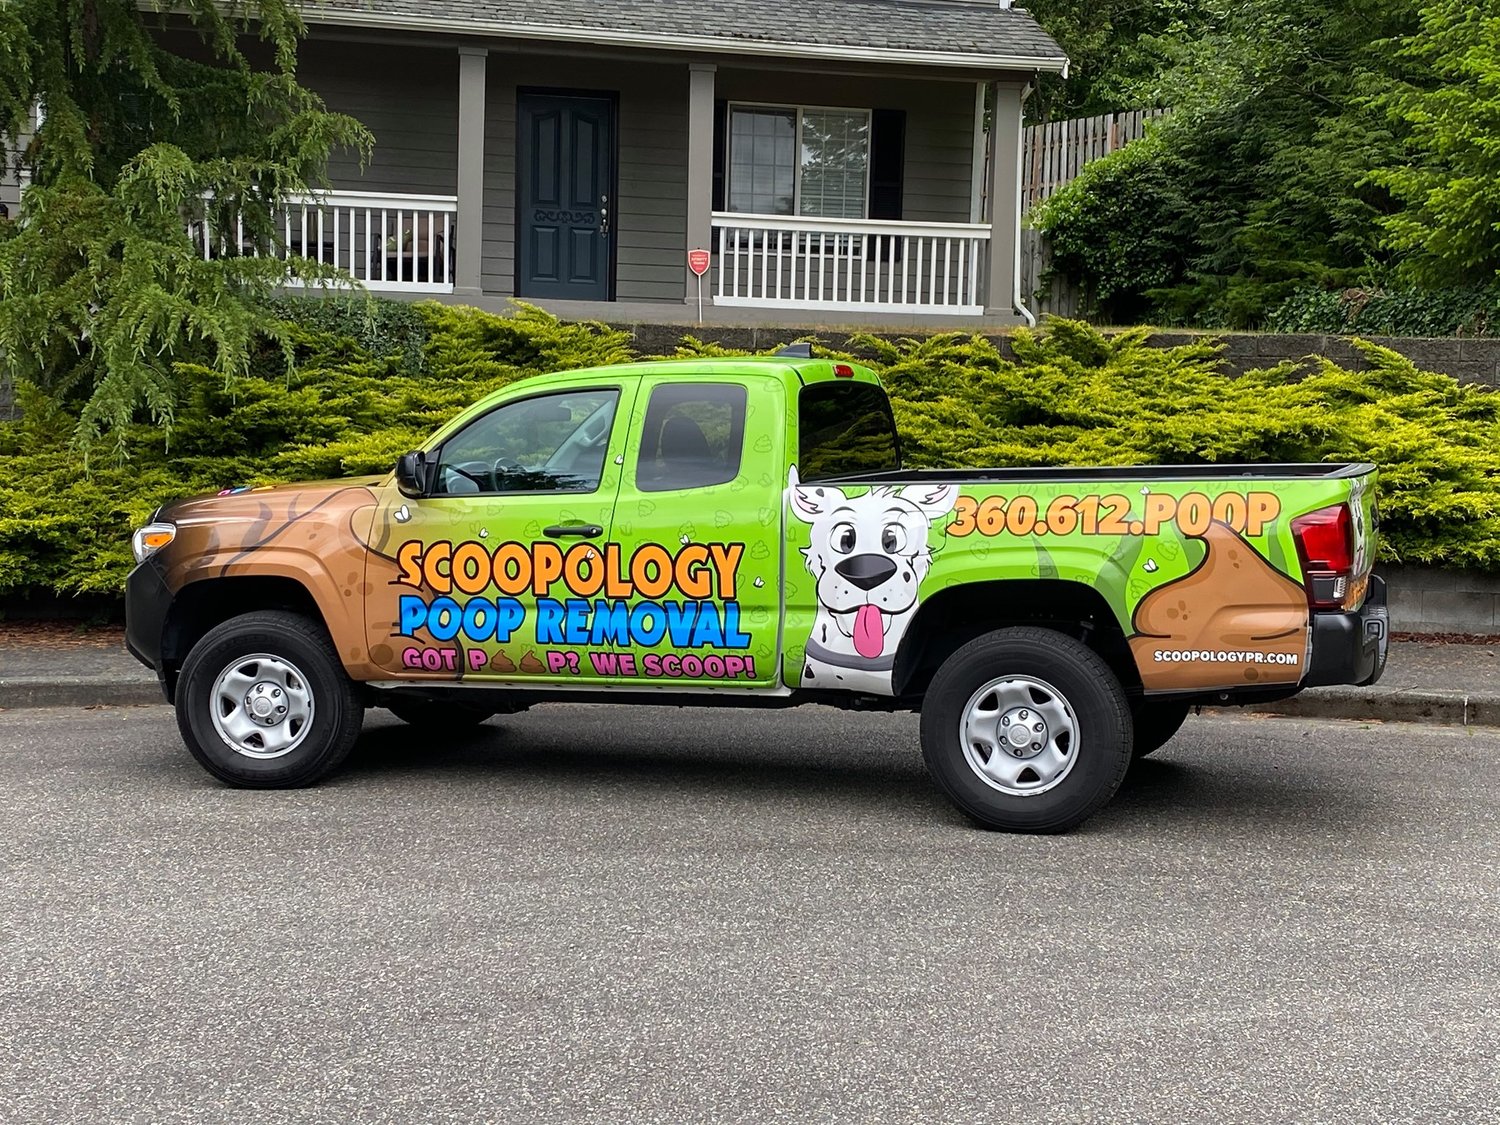 A vehicle with the pet waste removal company, Scoopology, advertises the business’ services.